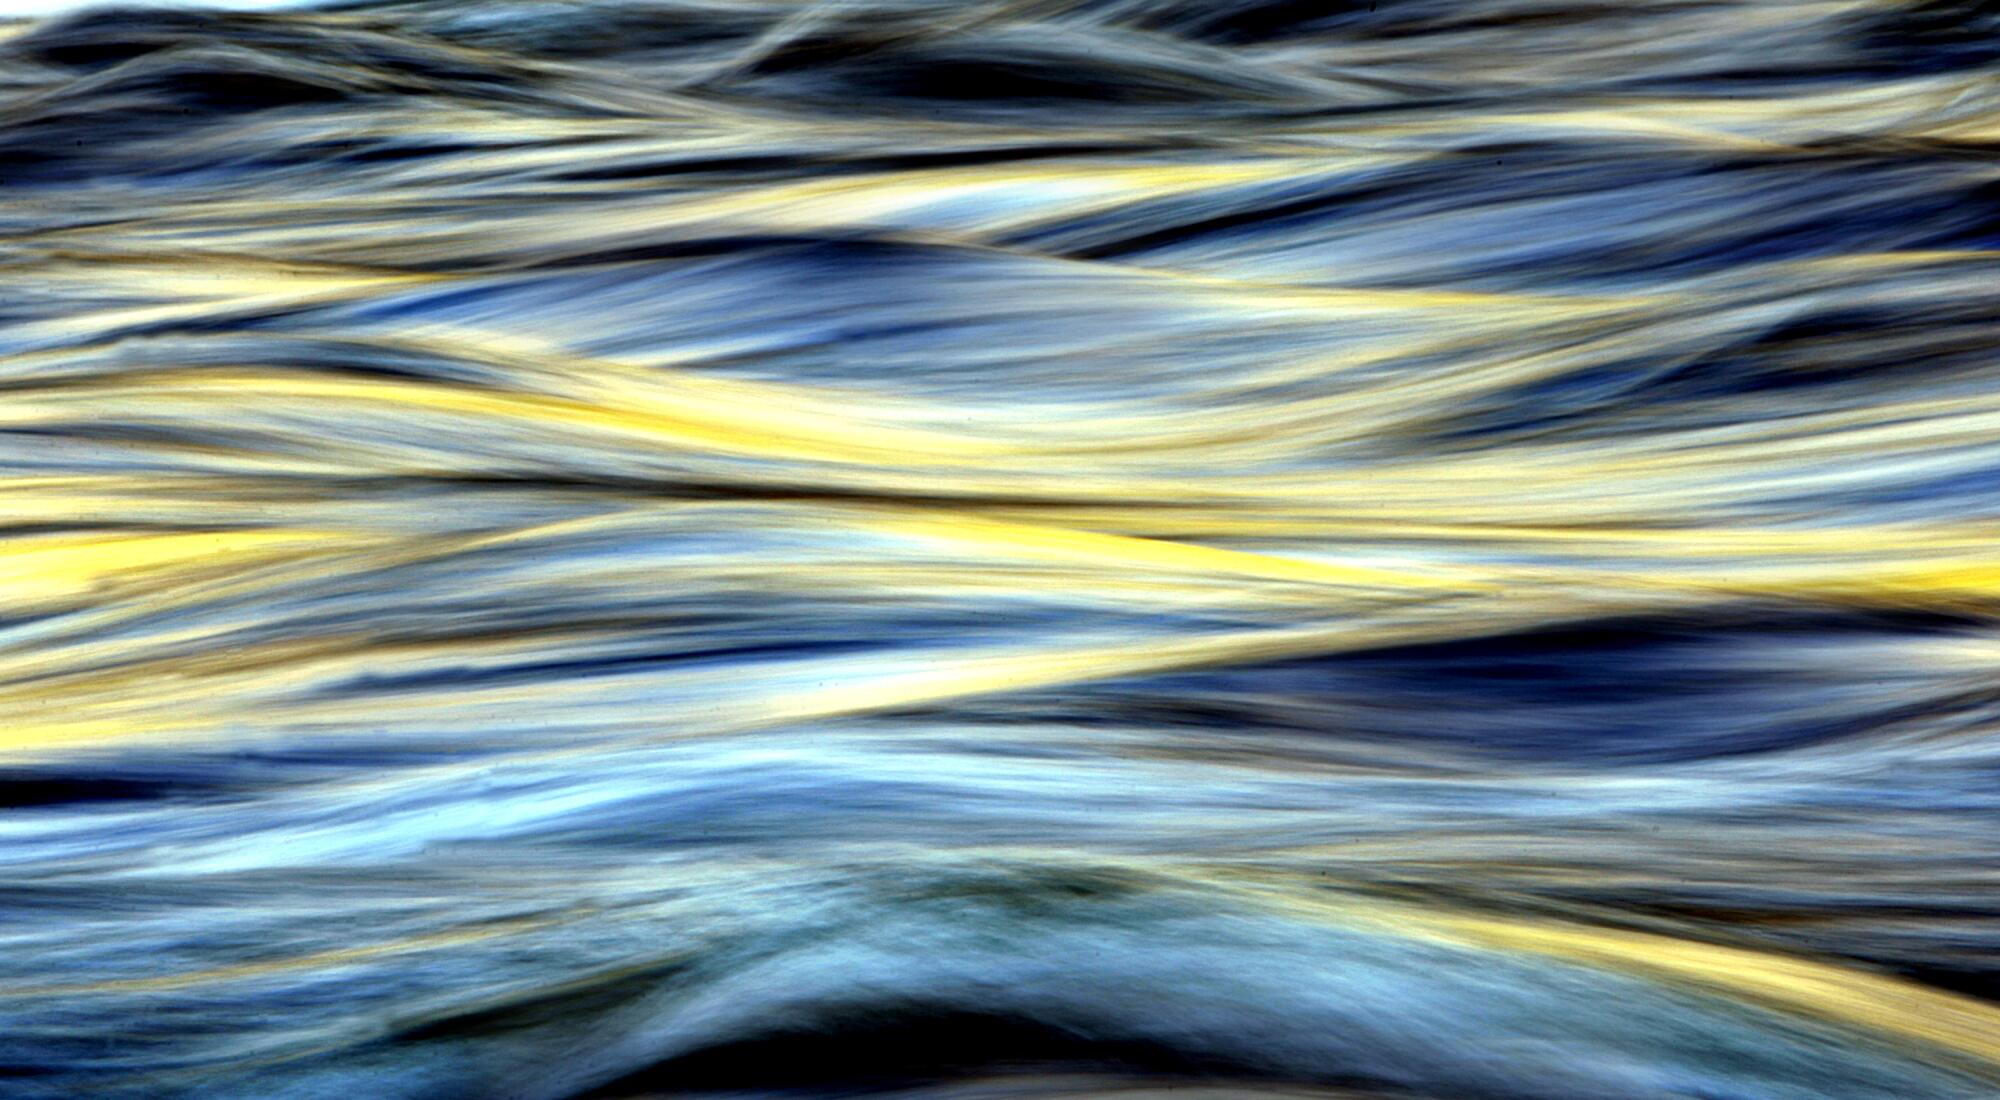 Water flowing, seen in blues and yellows